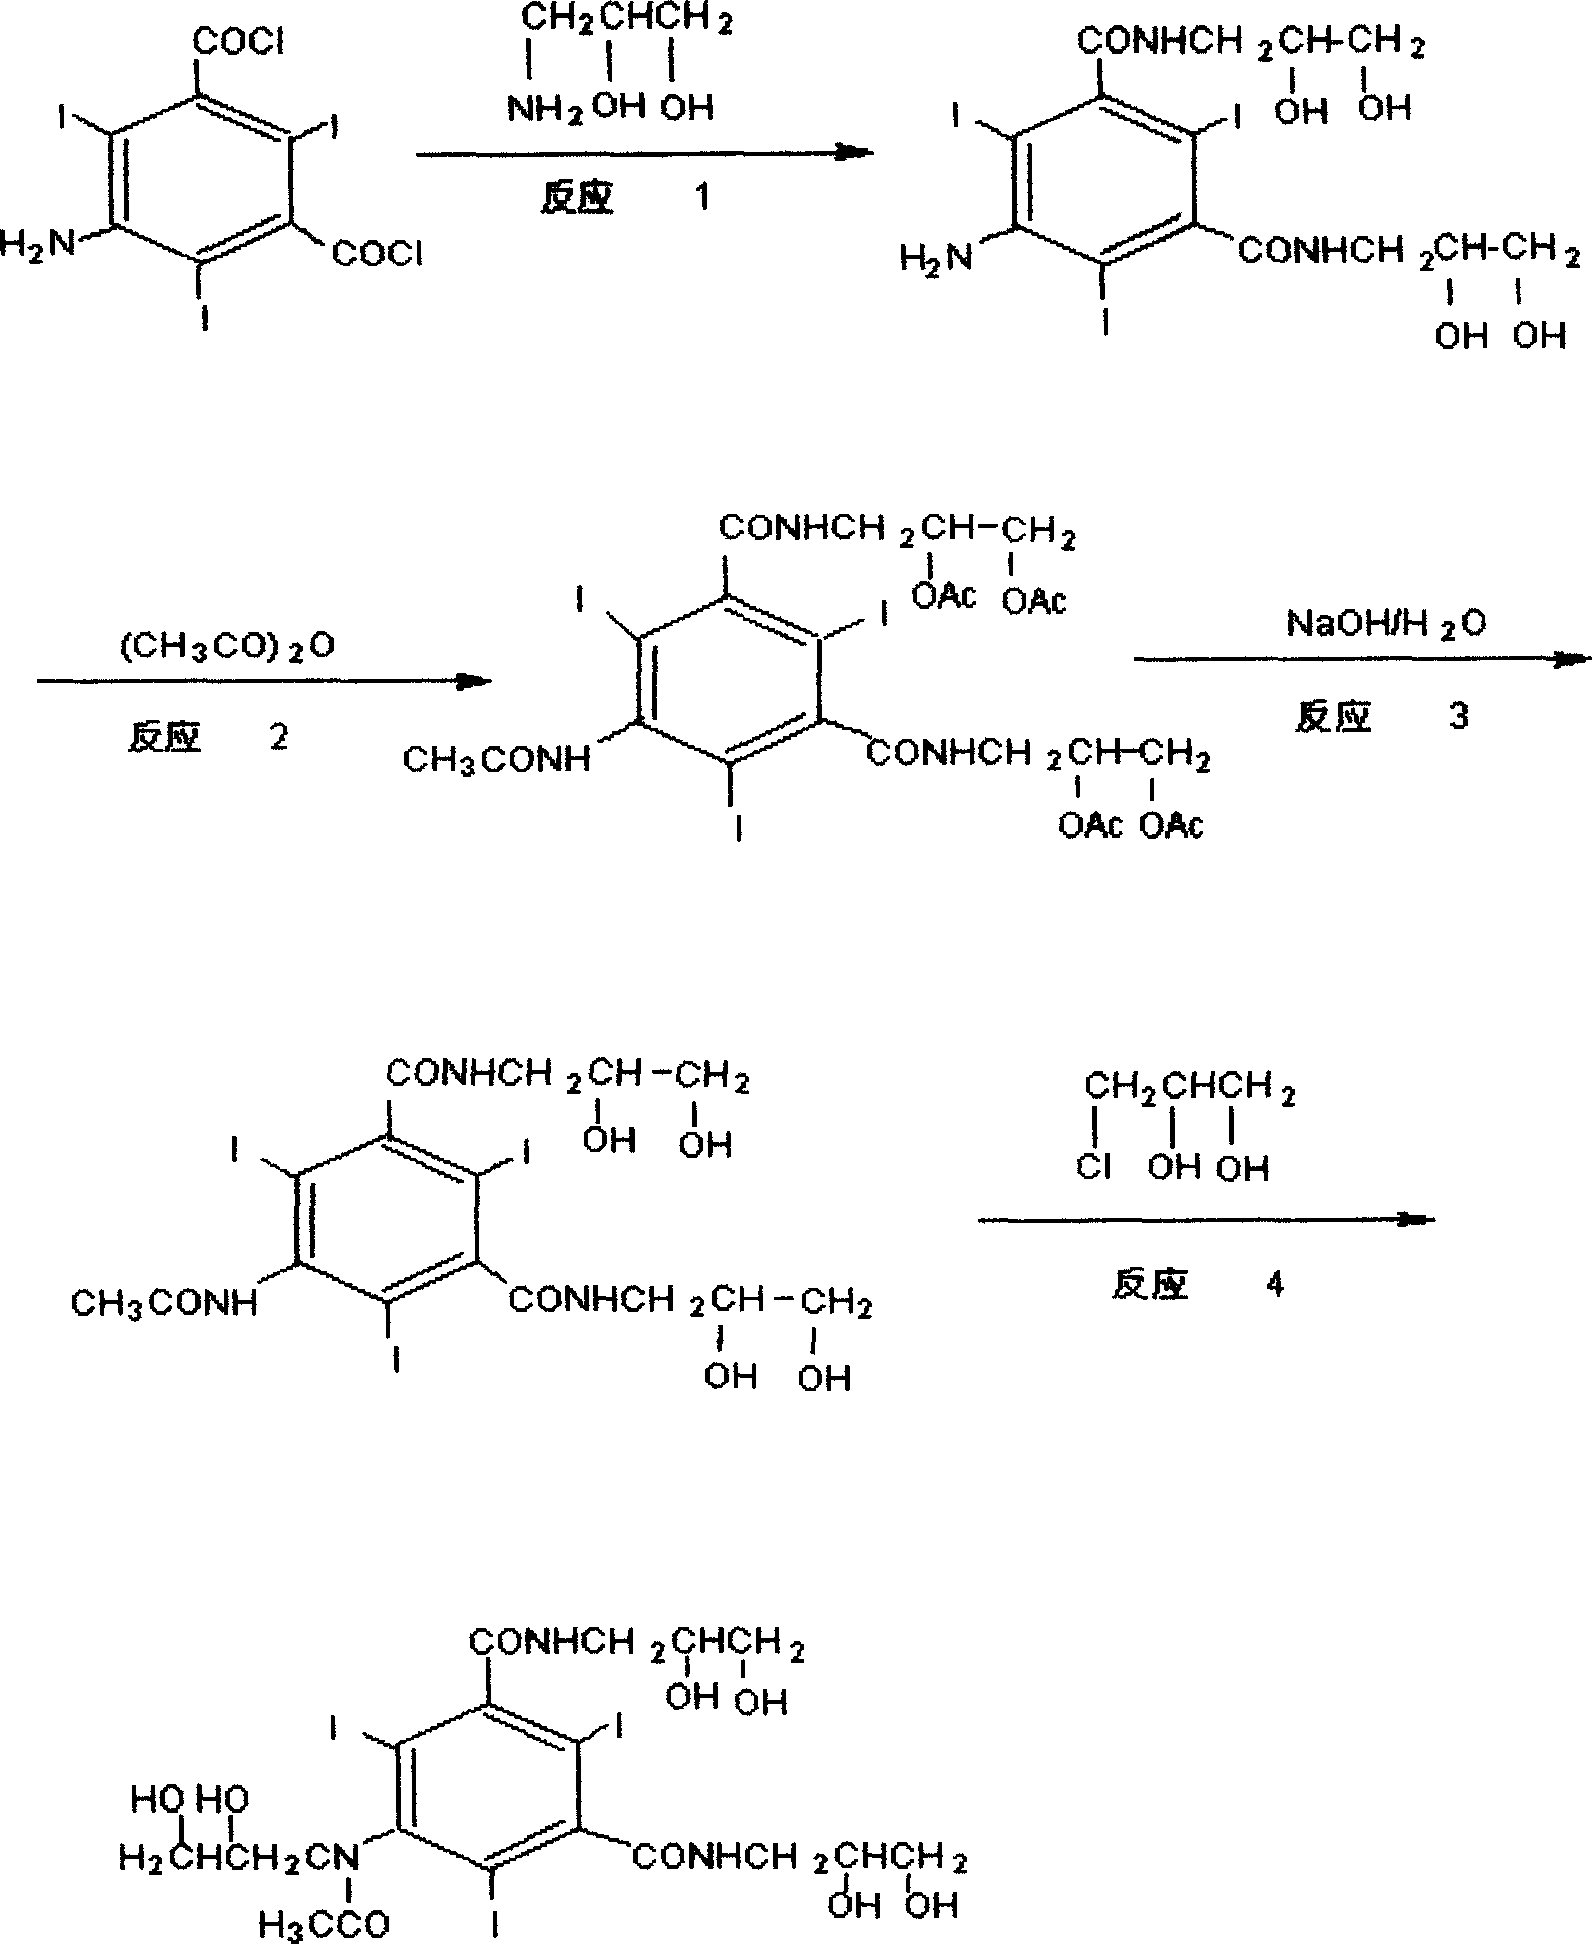 Process for iohexol manufacture